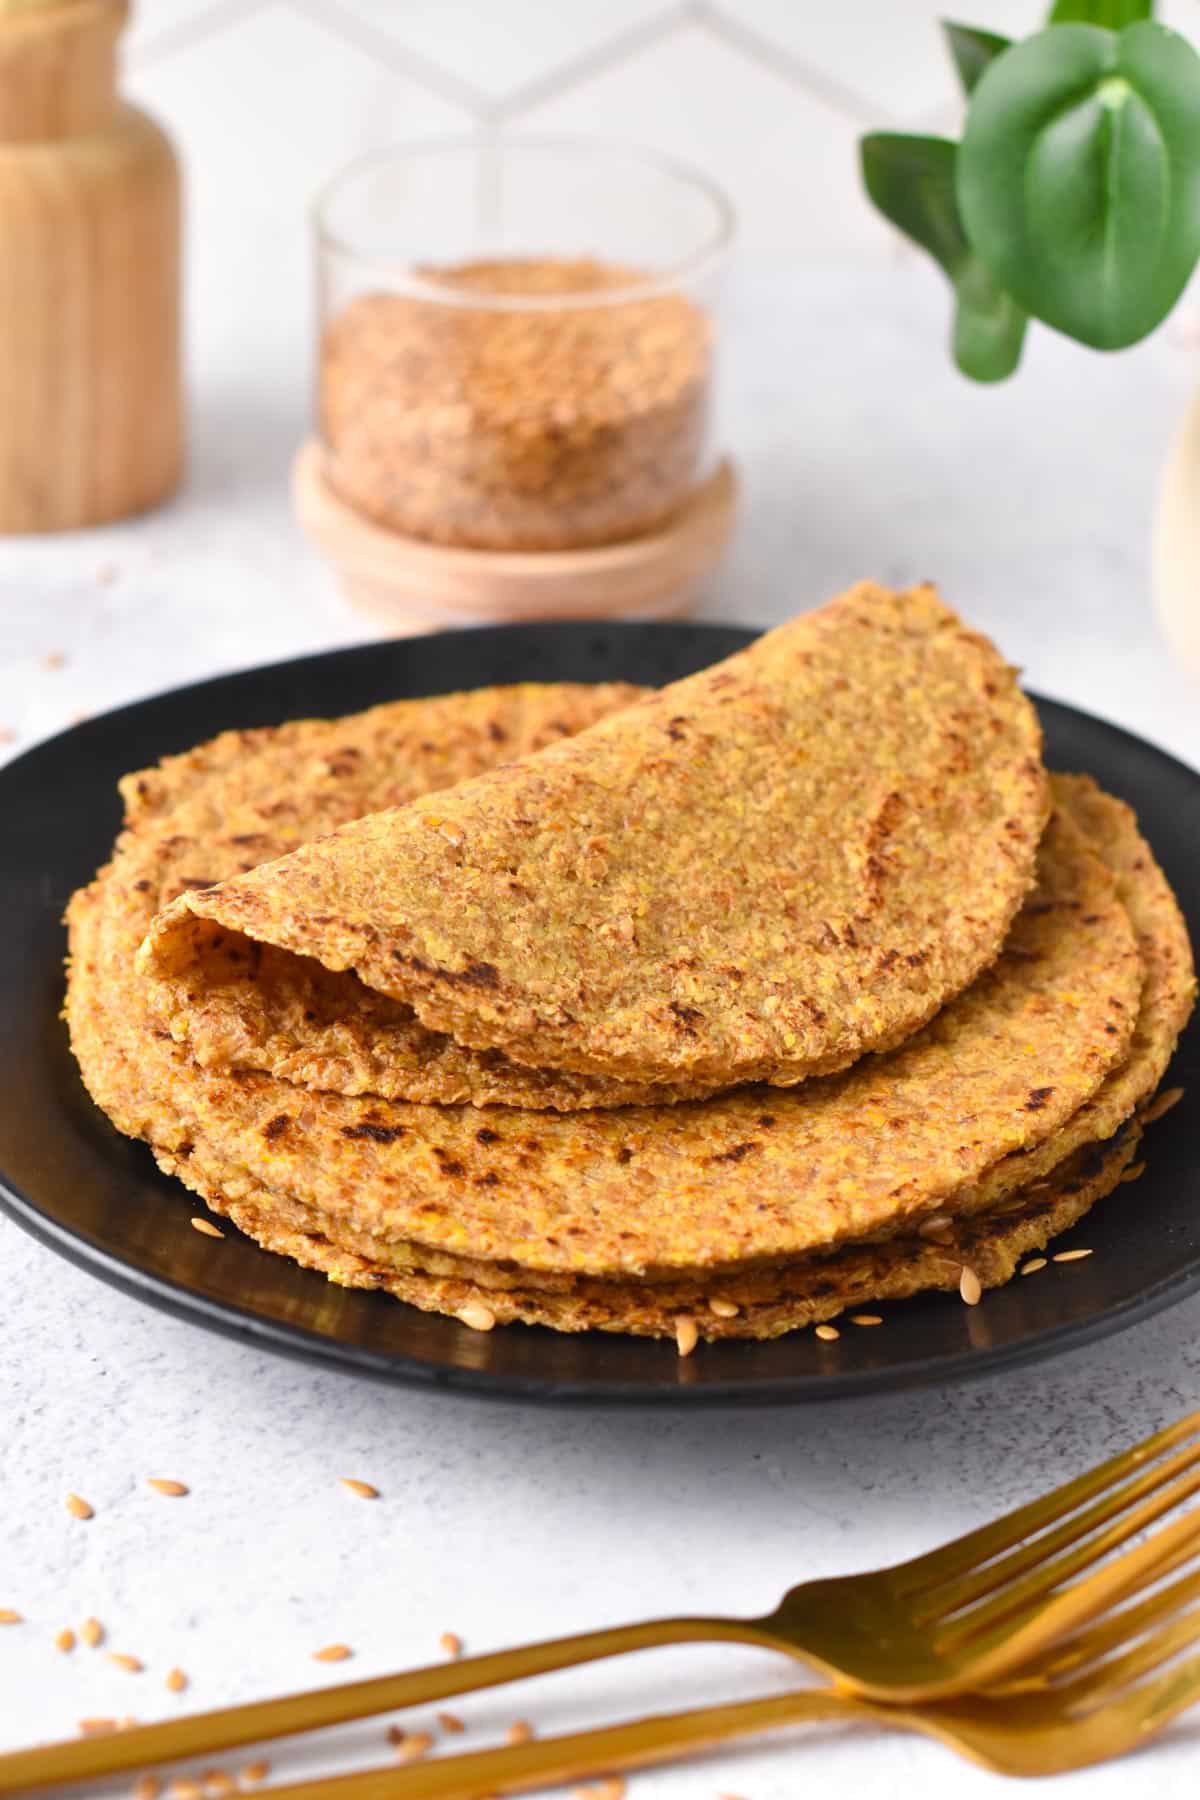 Flaxseed tortillas made with ground flaxseeds and water on a black plate with a jar full of flaxseeds in the background.